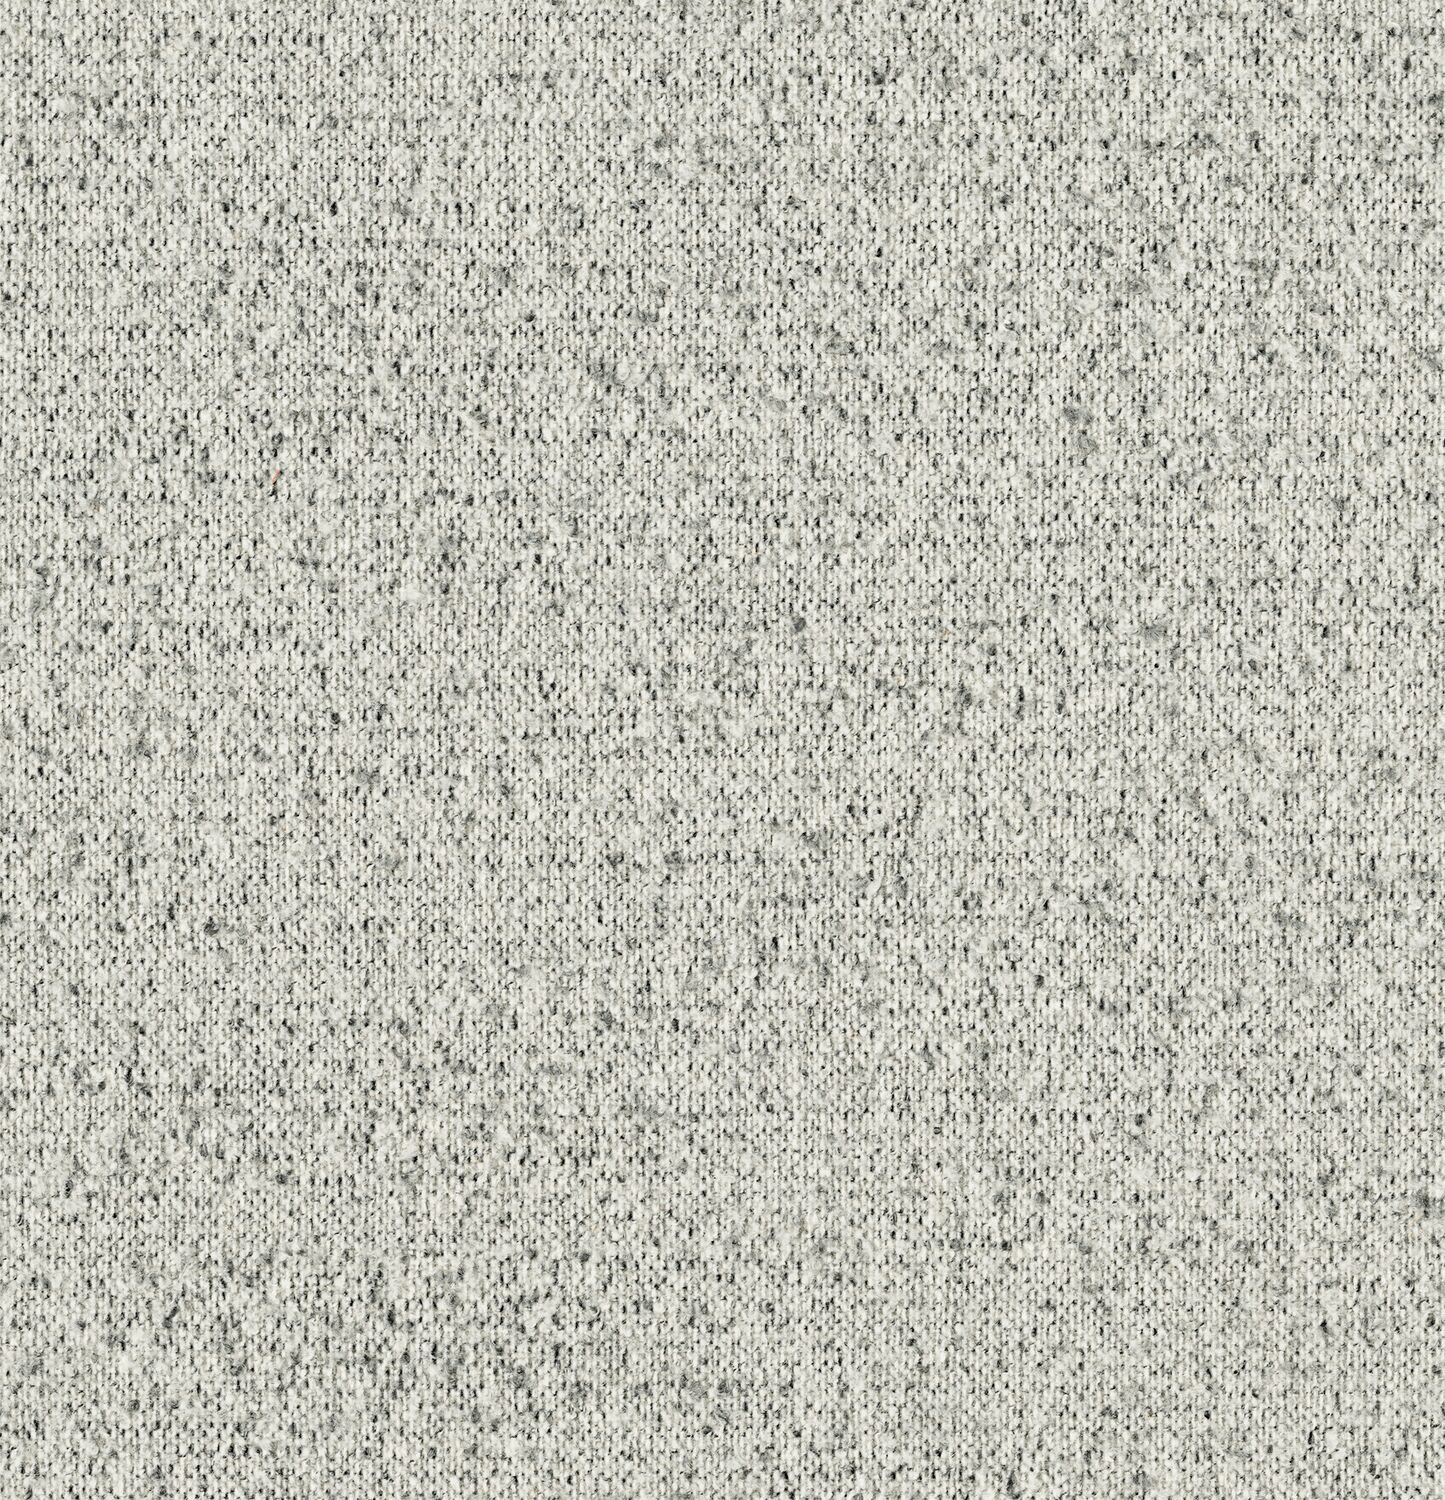 Everyday Boucle - Artemisia - 4111 - 05 - Half Yard Tileable Swatches